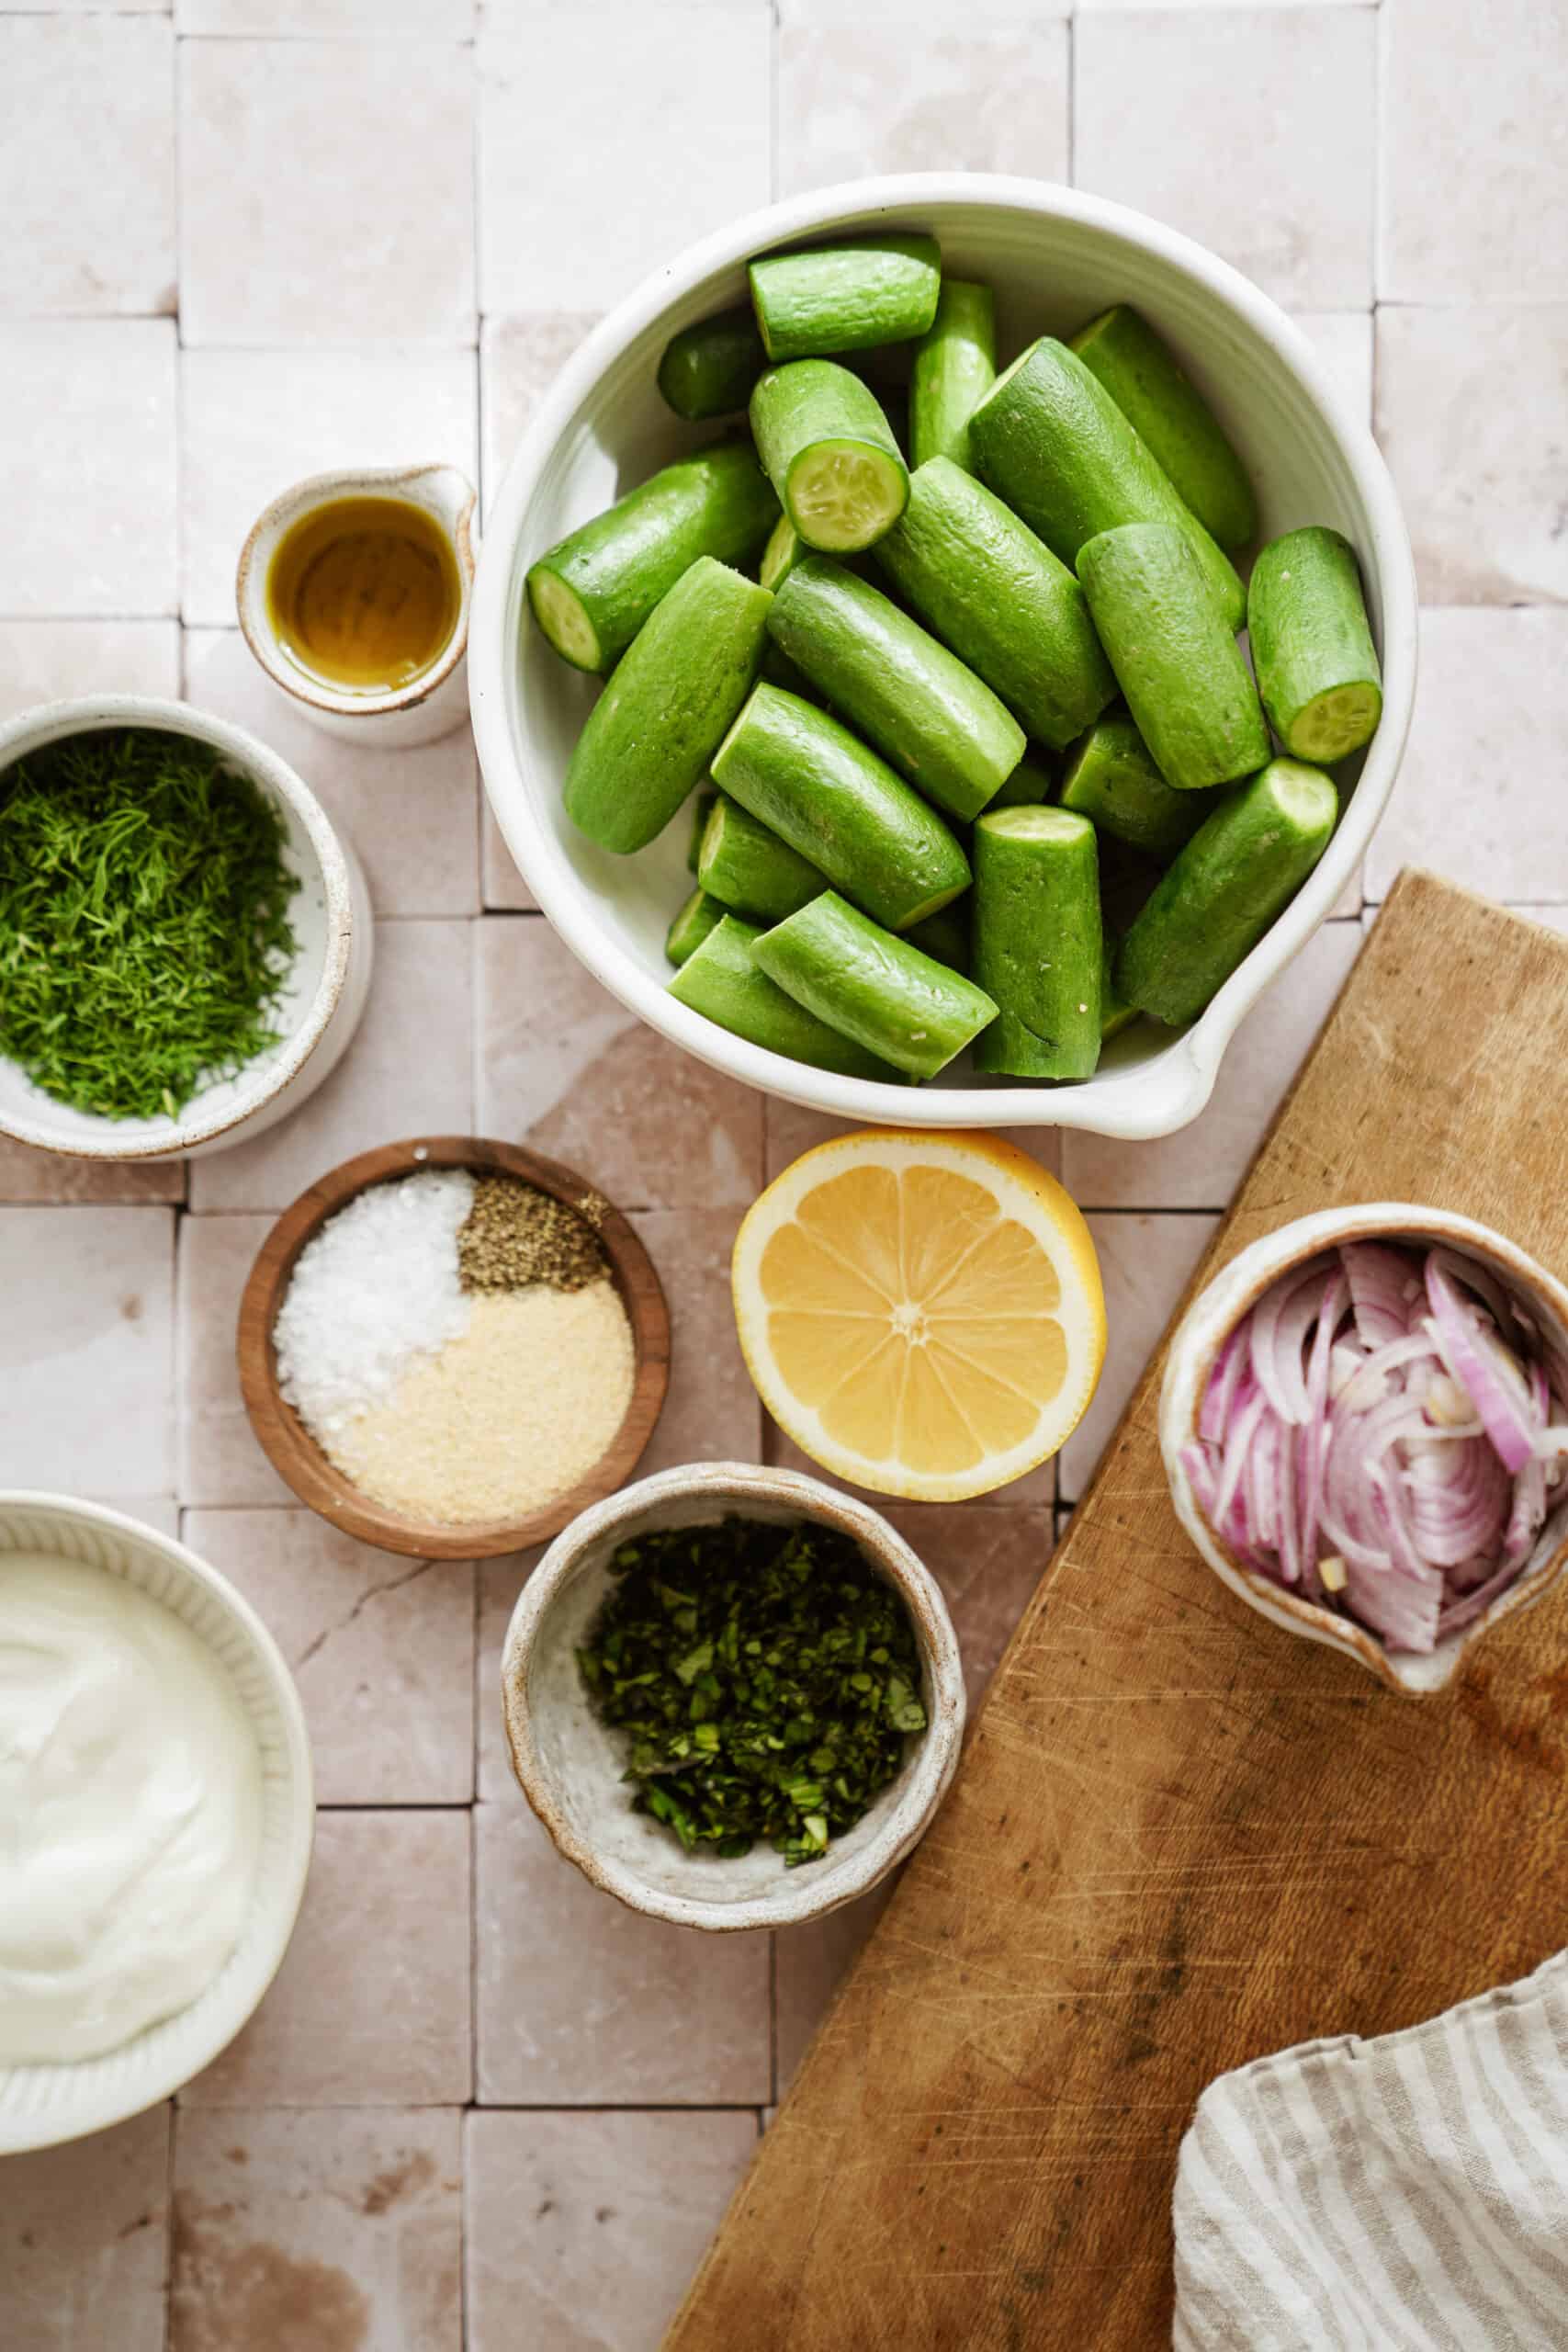 Ingredients for creamy cucumber salad